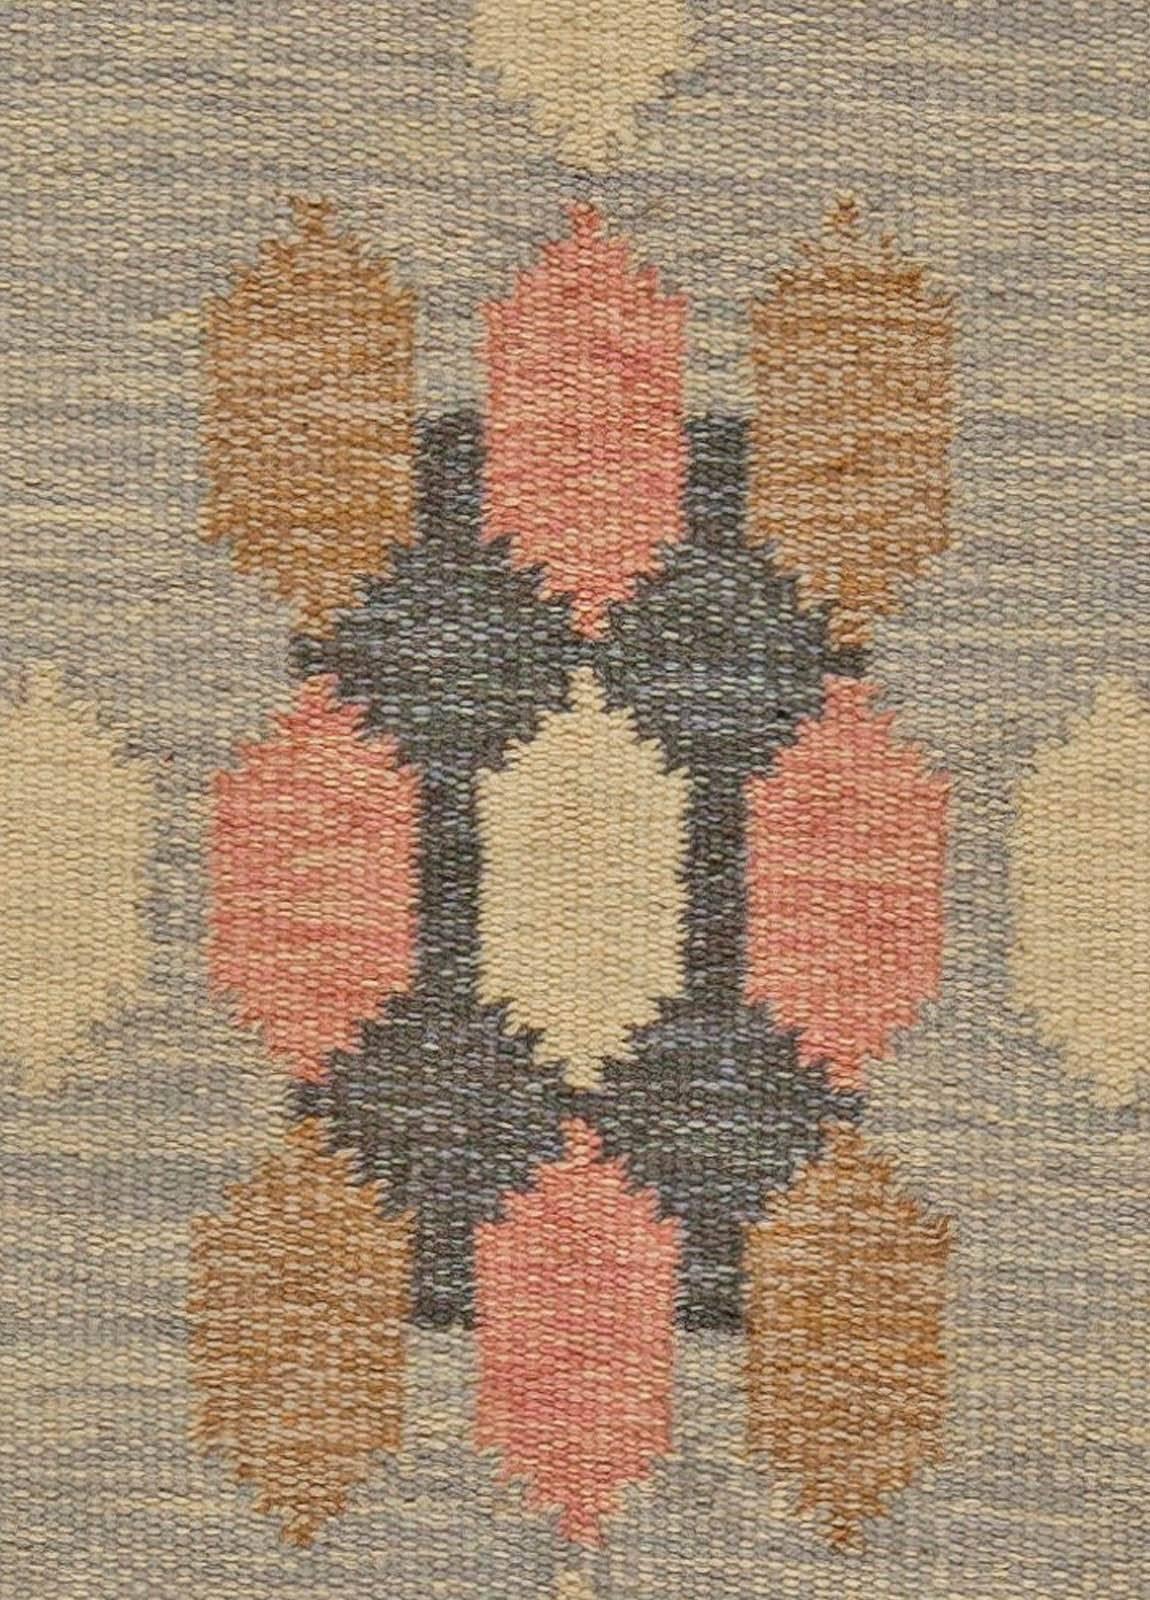 Hand-Woven High-quality Vintage Swedish Flat-Weave Wool Rug Signed by Ingegerd Silow